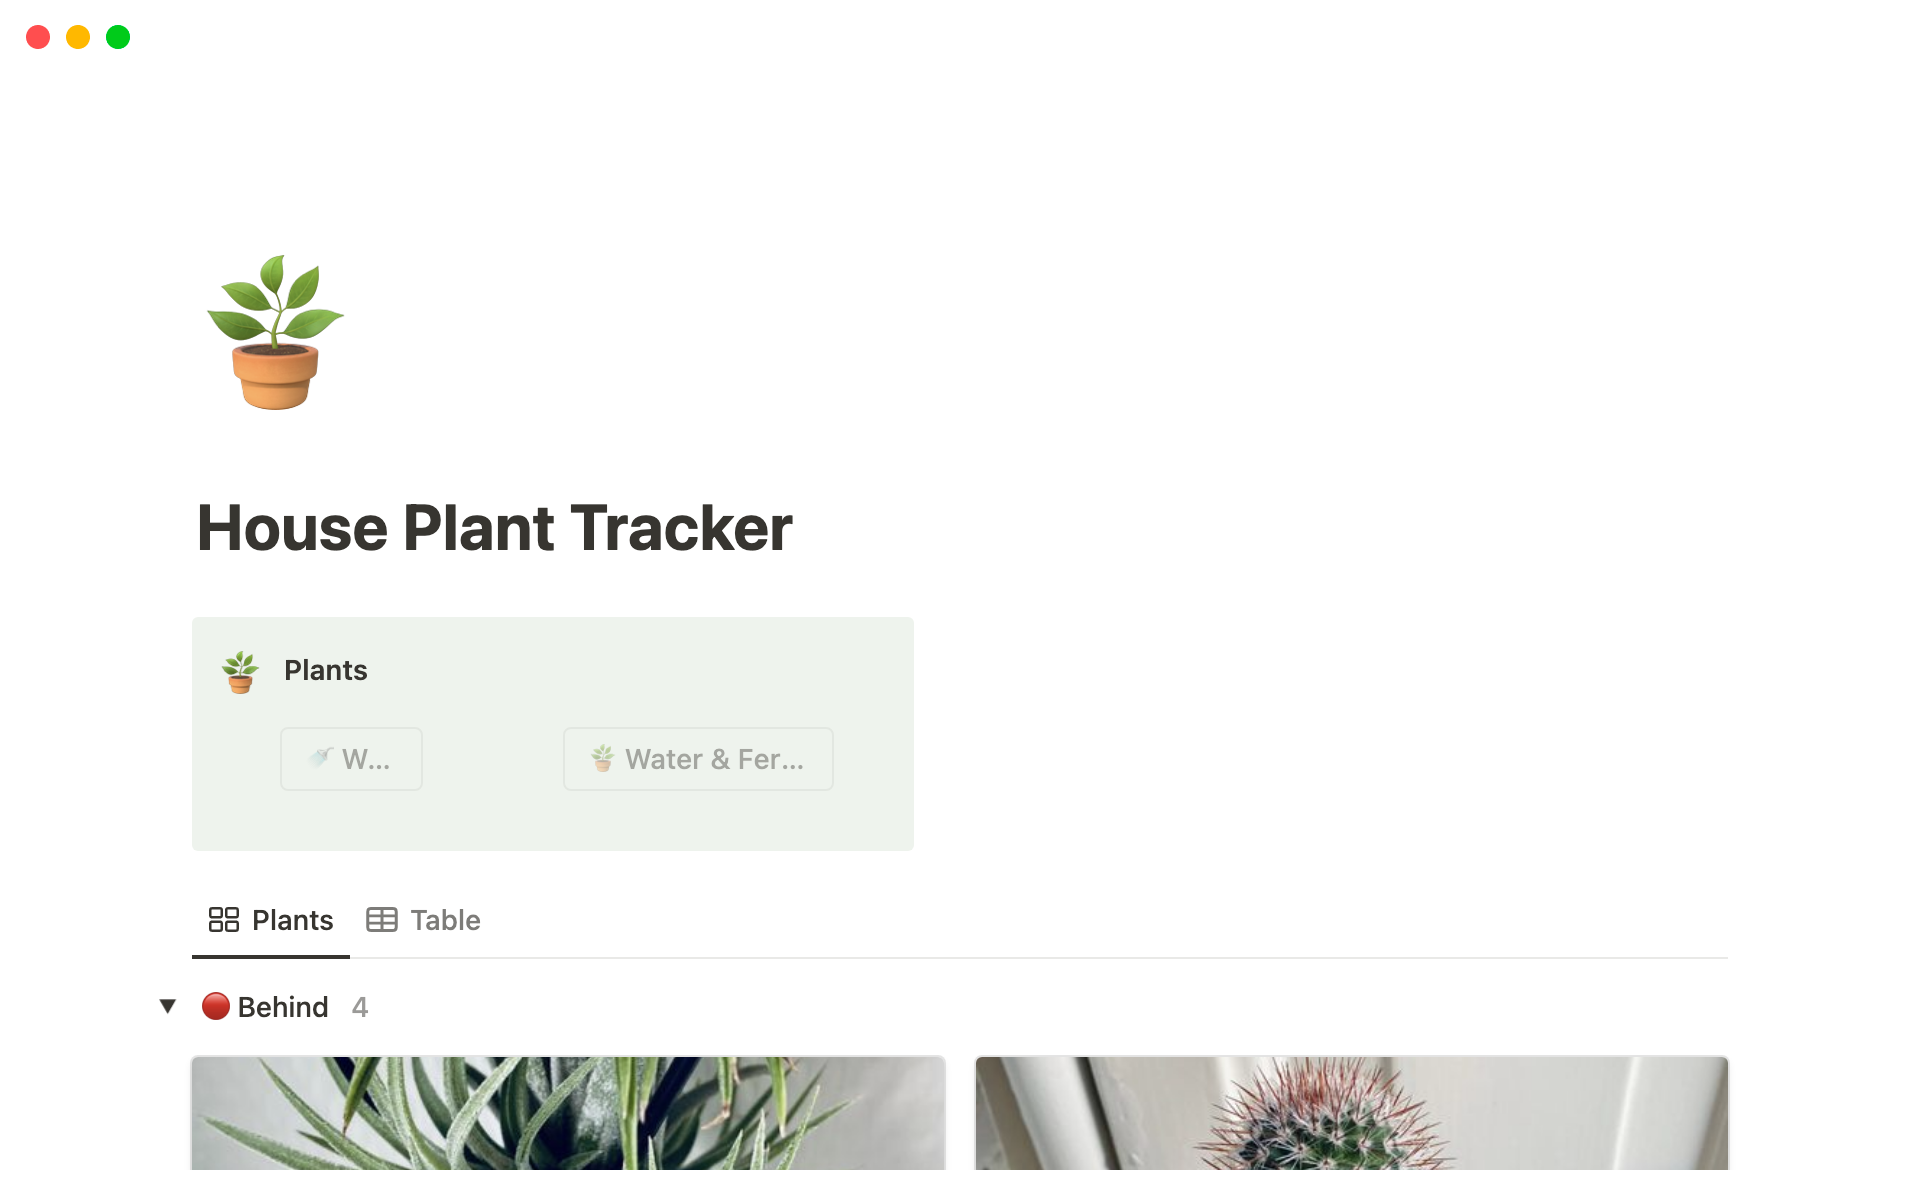 This house plant tracker allows you to easily keep track of your watering and fertilisation schedule for all of your plants.